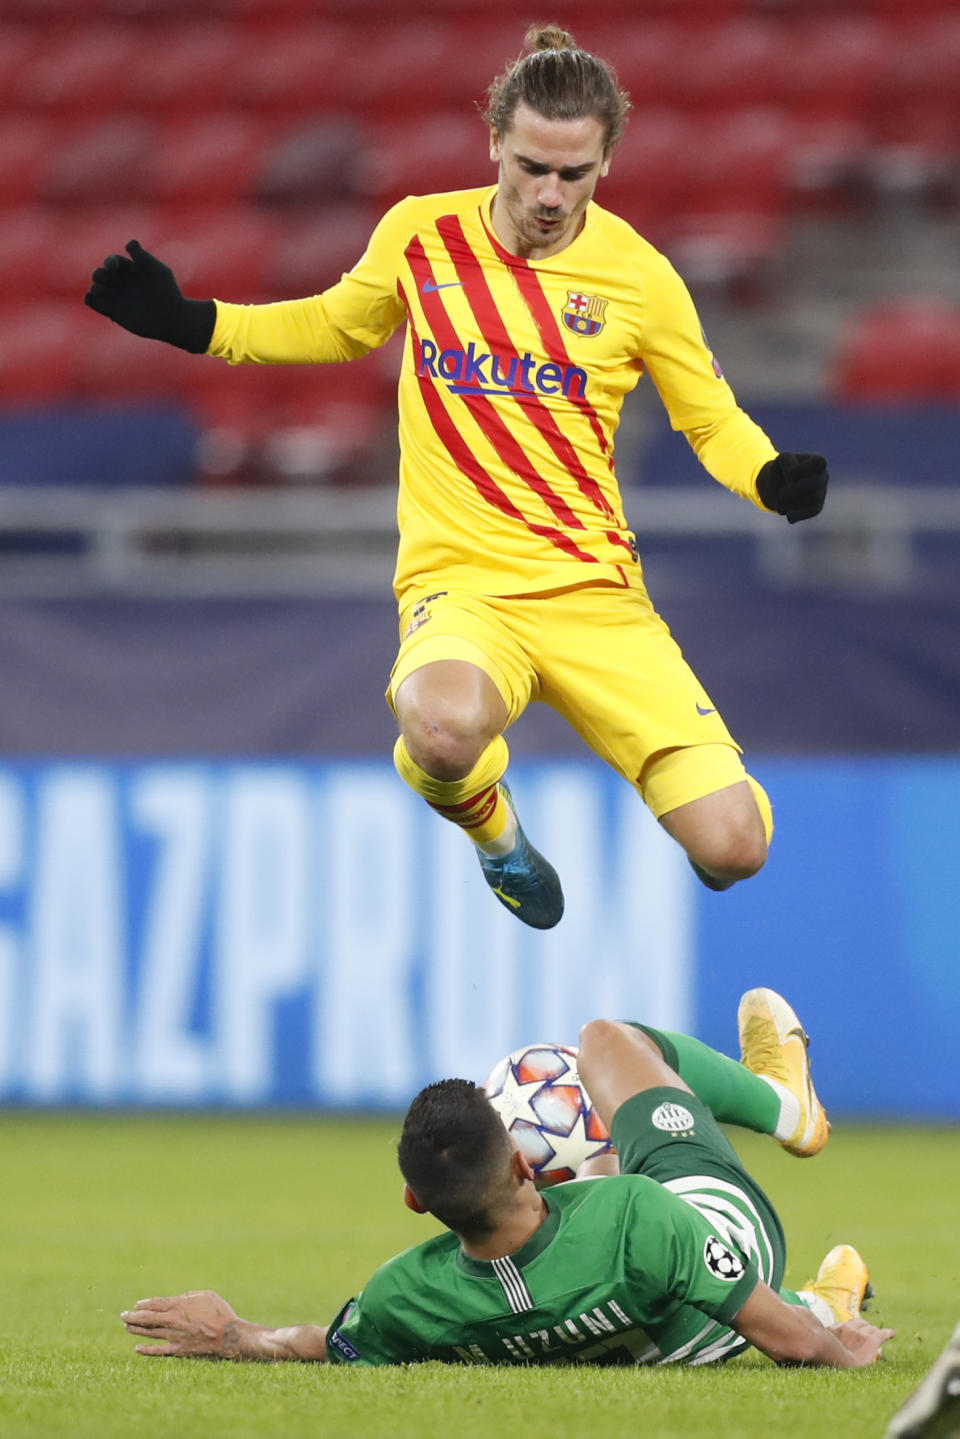 Barcelona's Antoine Griezmann is tackled by Ferencvaros' Myrto Uzuni during the Champions League group G soccer match between Ferencvaros and Barcelona at the Ferenc Puskas stadium in Budapest, Hungary, Wednesday, Dec. 2, 2020. (AP Photo/Laszlo Balogh)